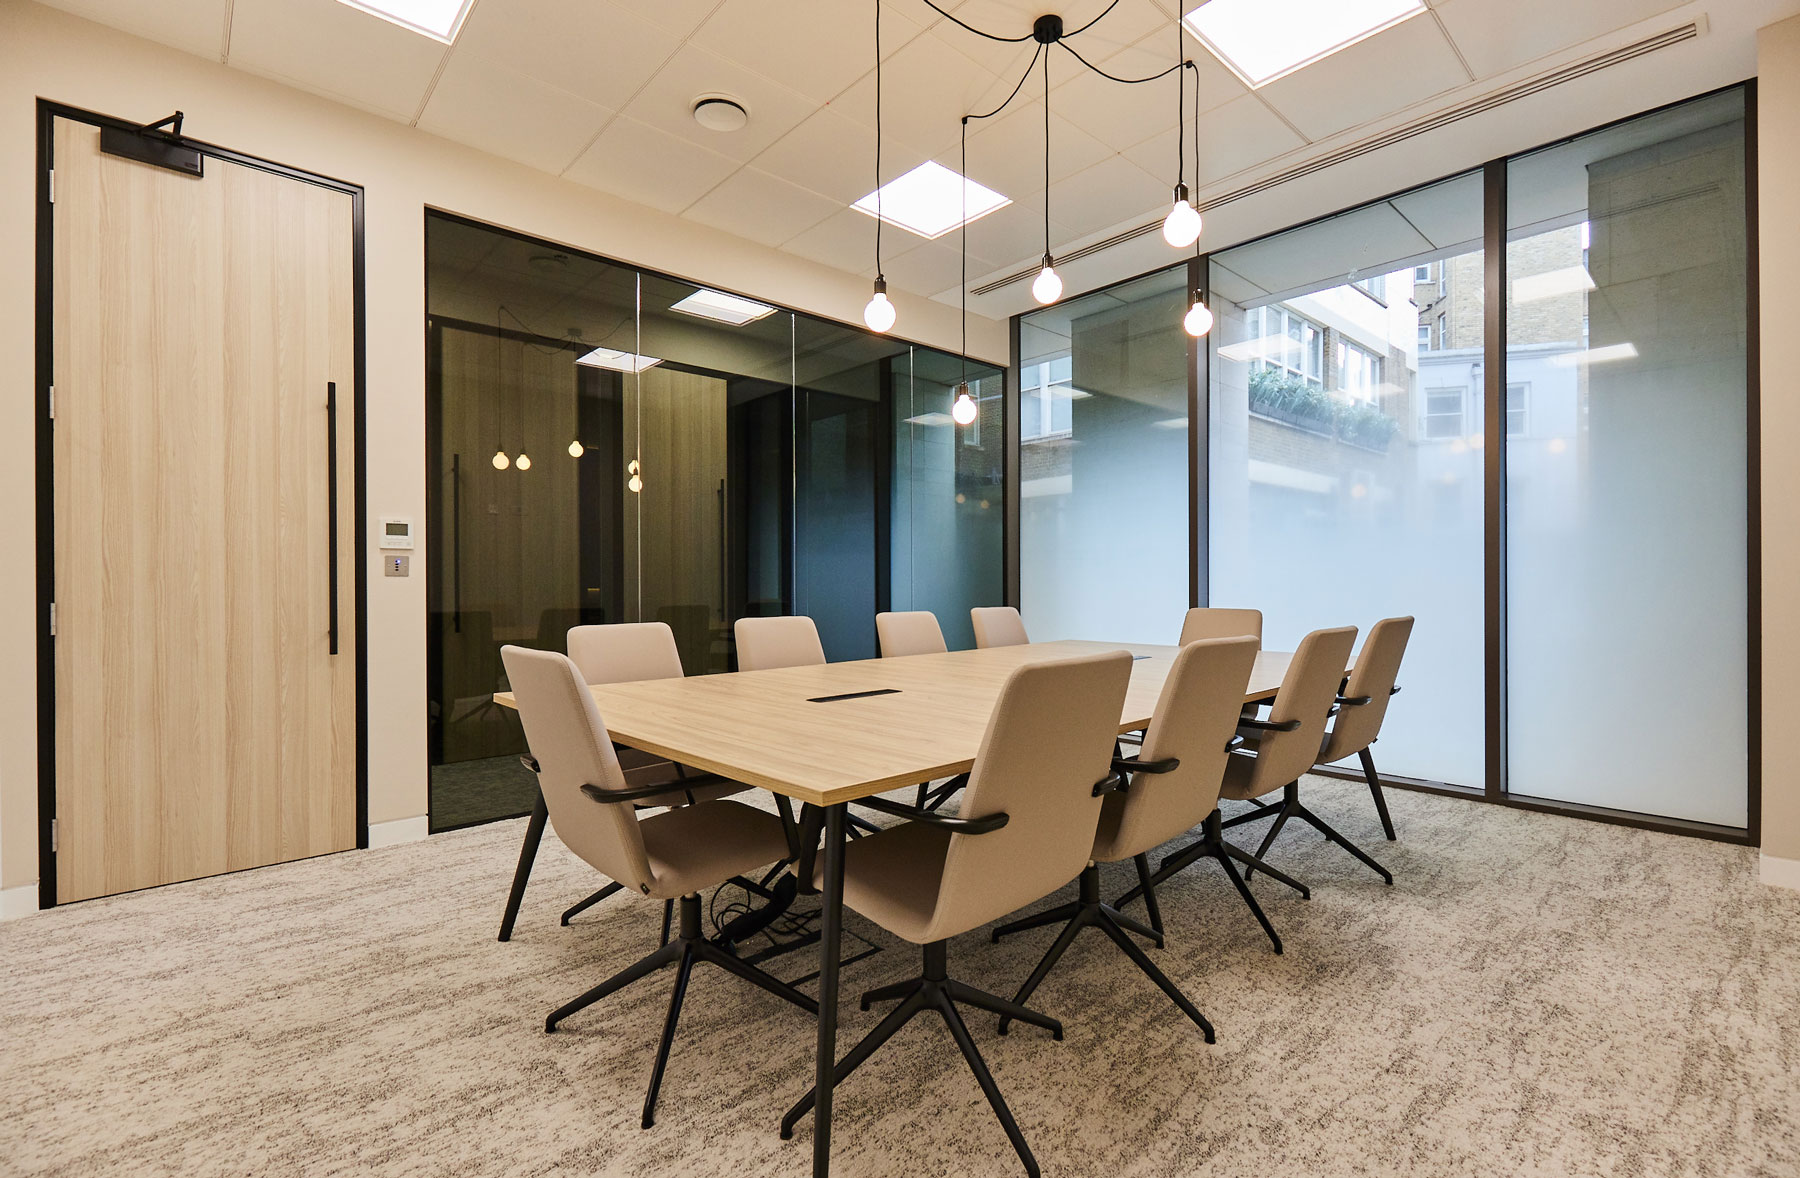 Feature lighting with exposed light bulbs hangs over a meeting room table with neutral coloured chairs and glass walls